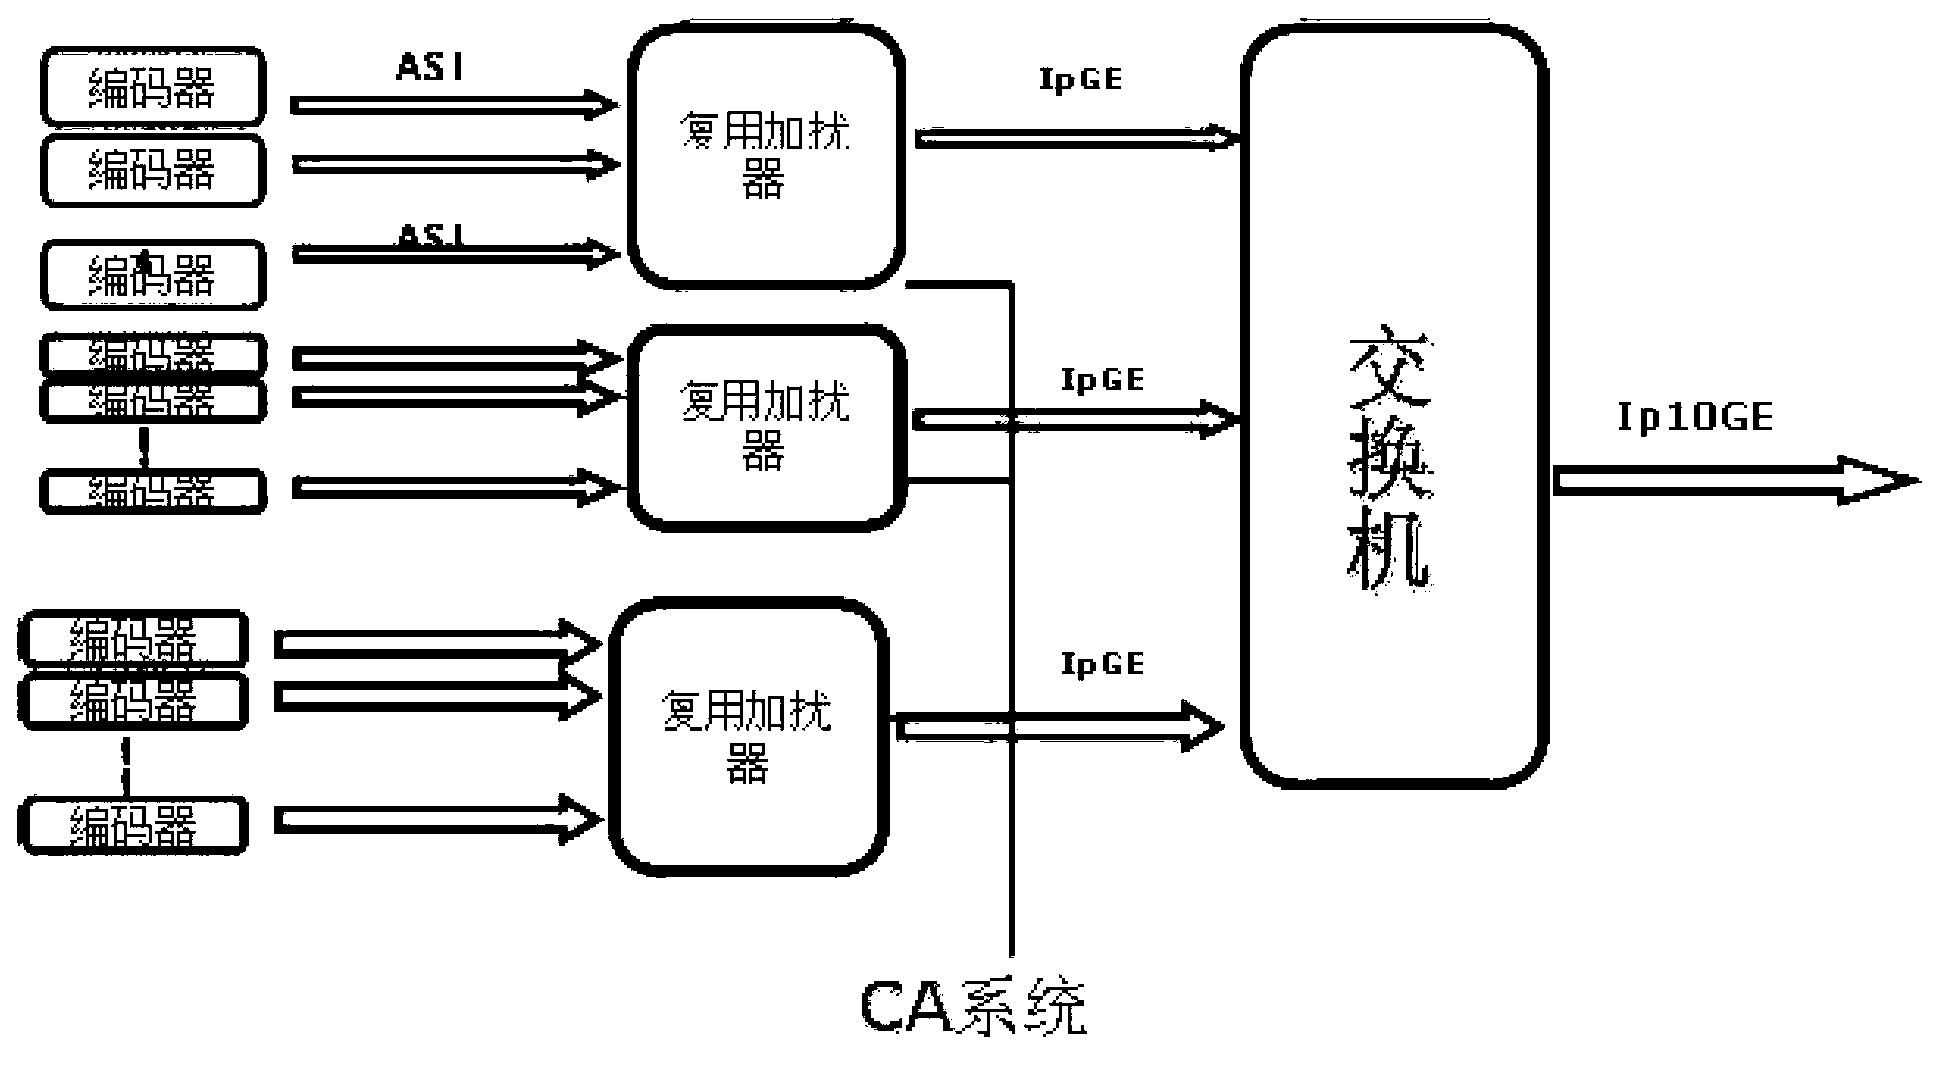 Front data transmission terminal in network data transmission system